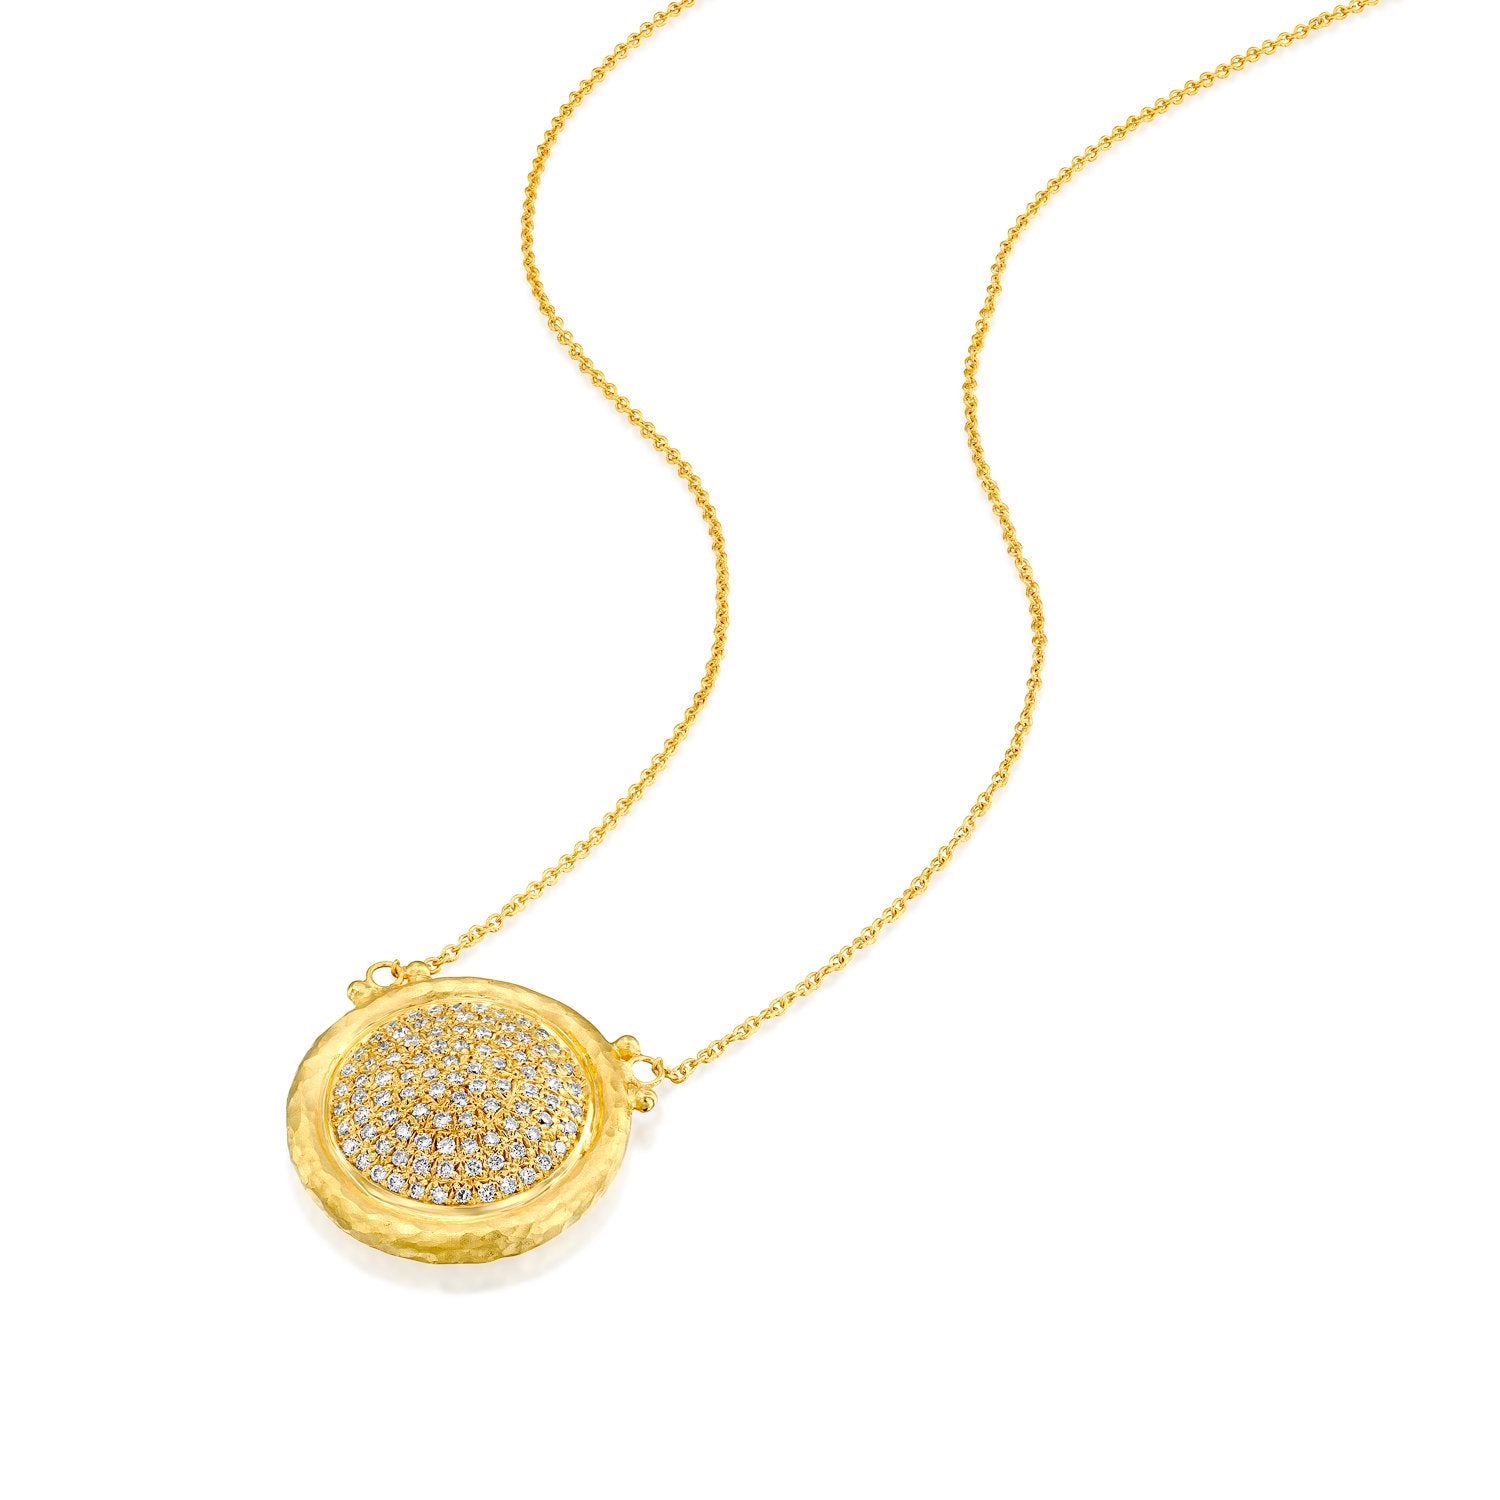 5751 - 14kt yellow gold round pave diamond necklace with beautiful hammered edges